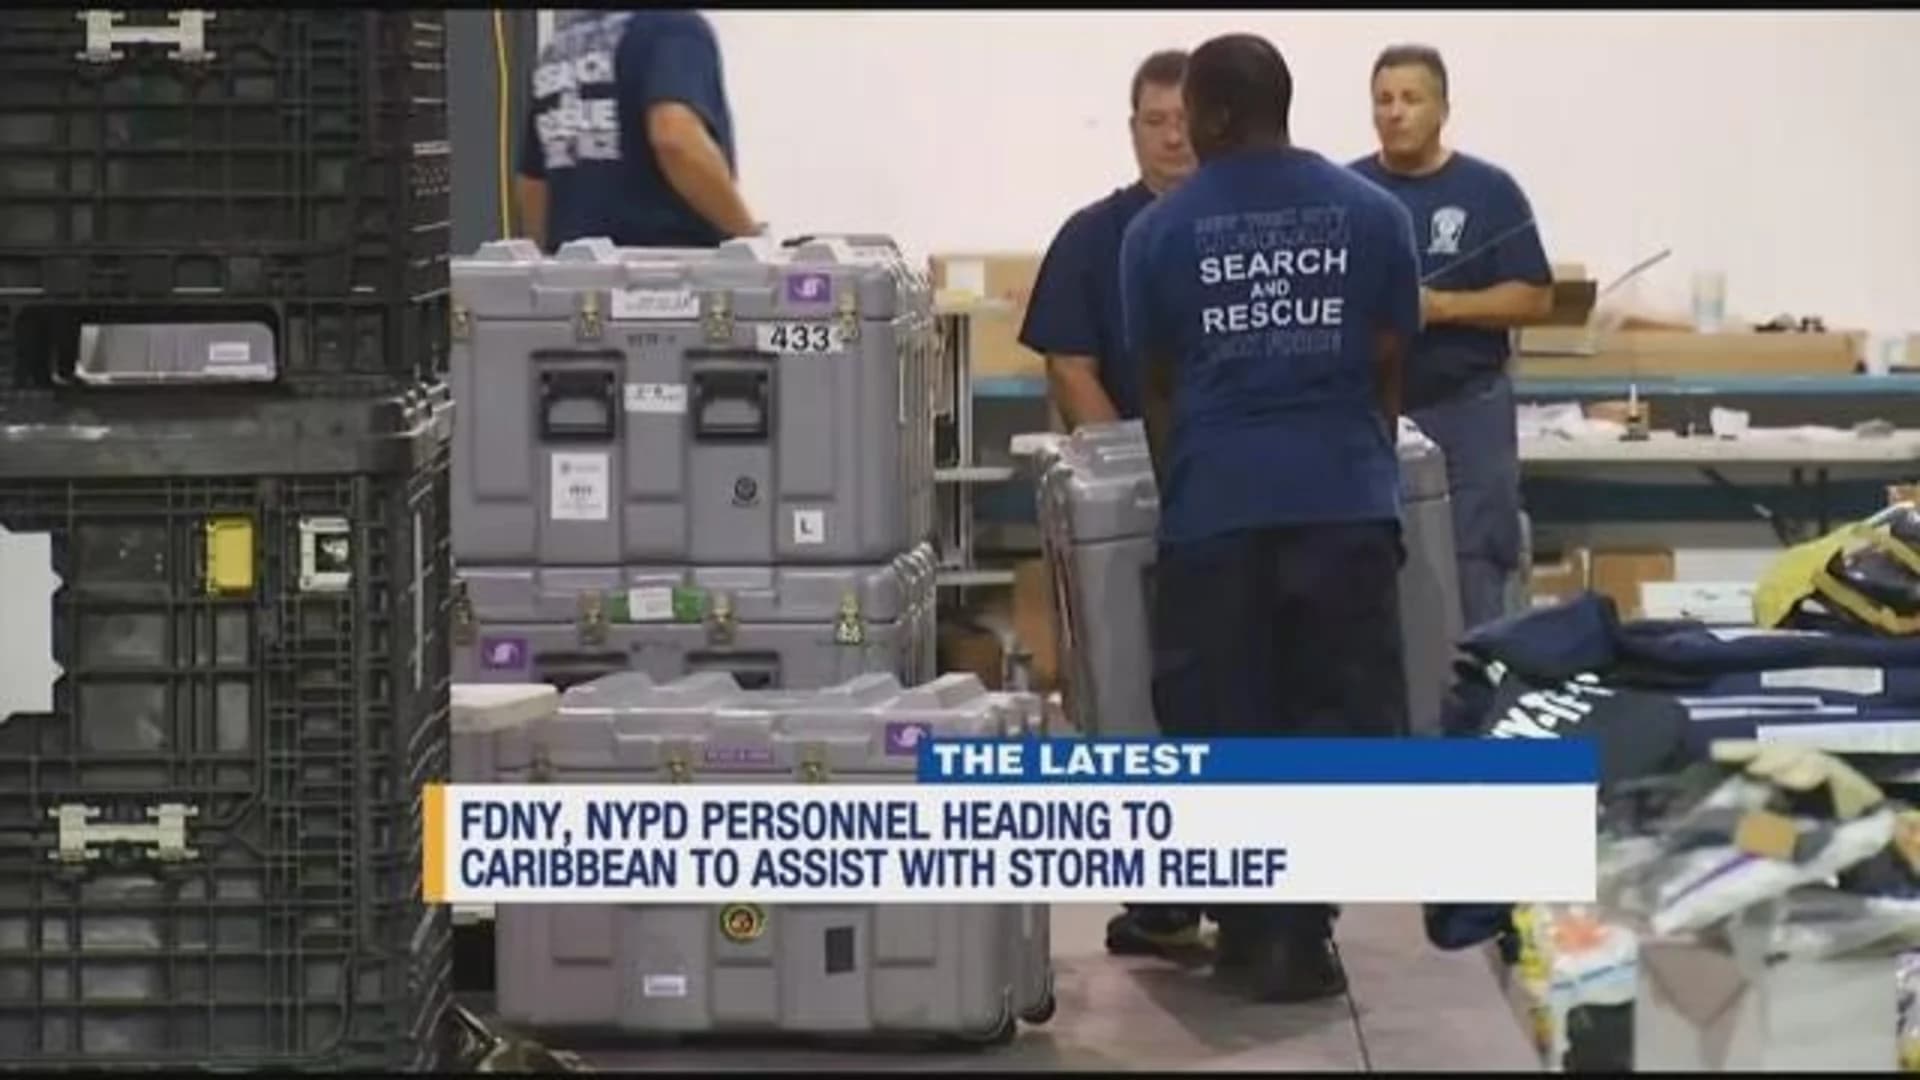 City personnel heading to Caribbean to assist with storm relief